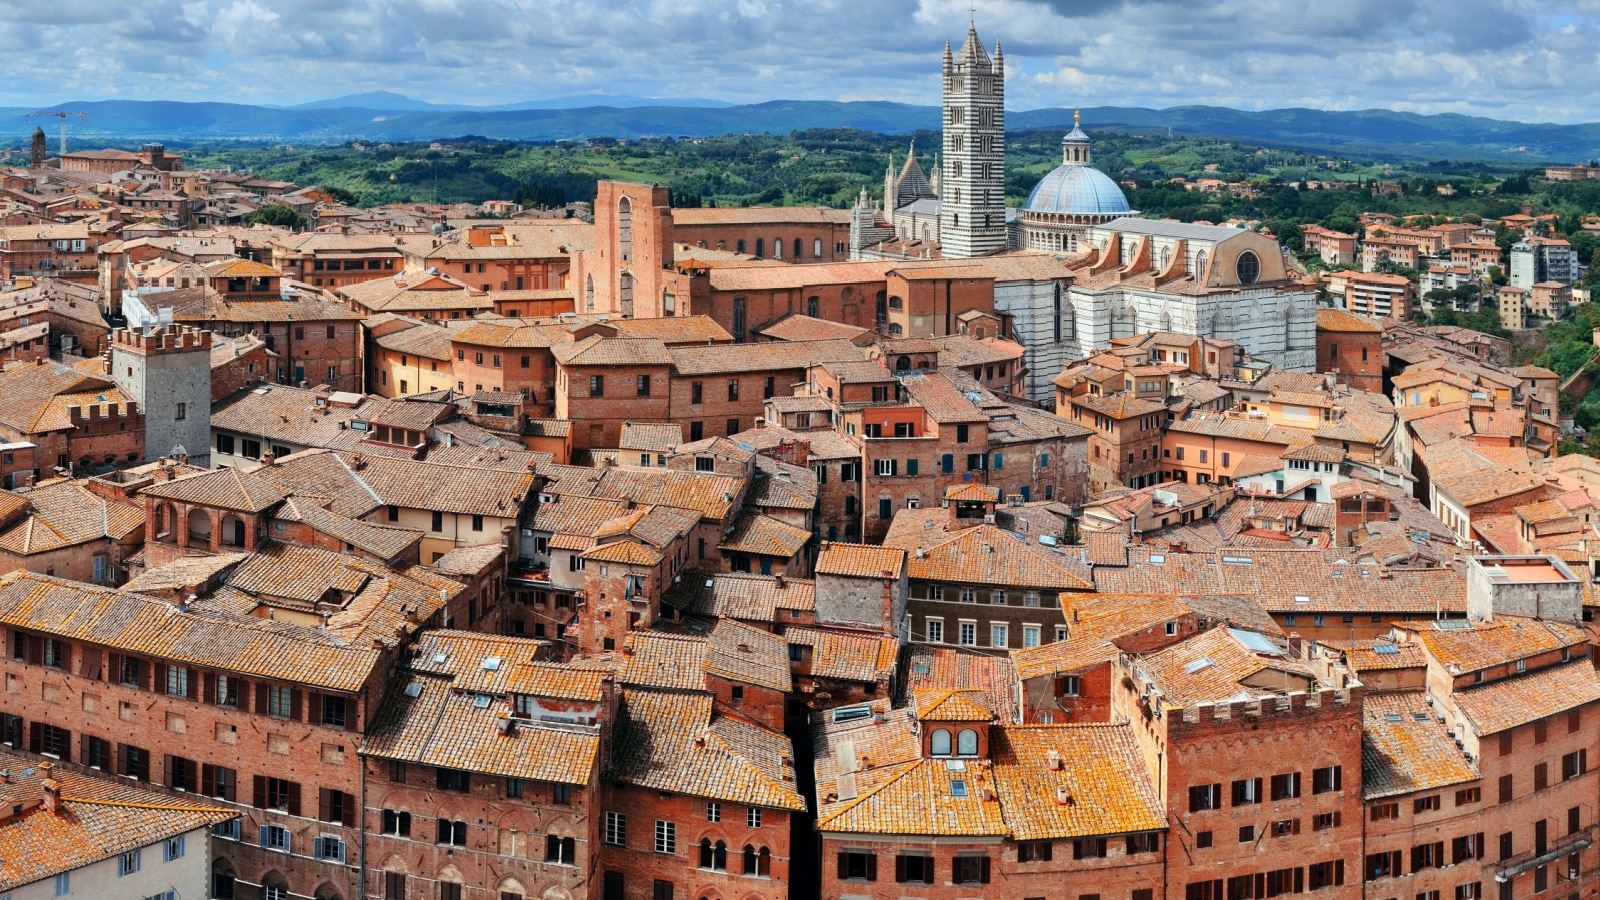 Medieval town Siena rooftop view with historic buildings in Italy